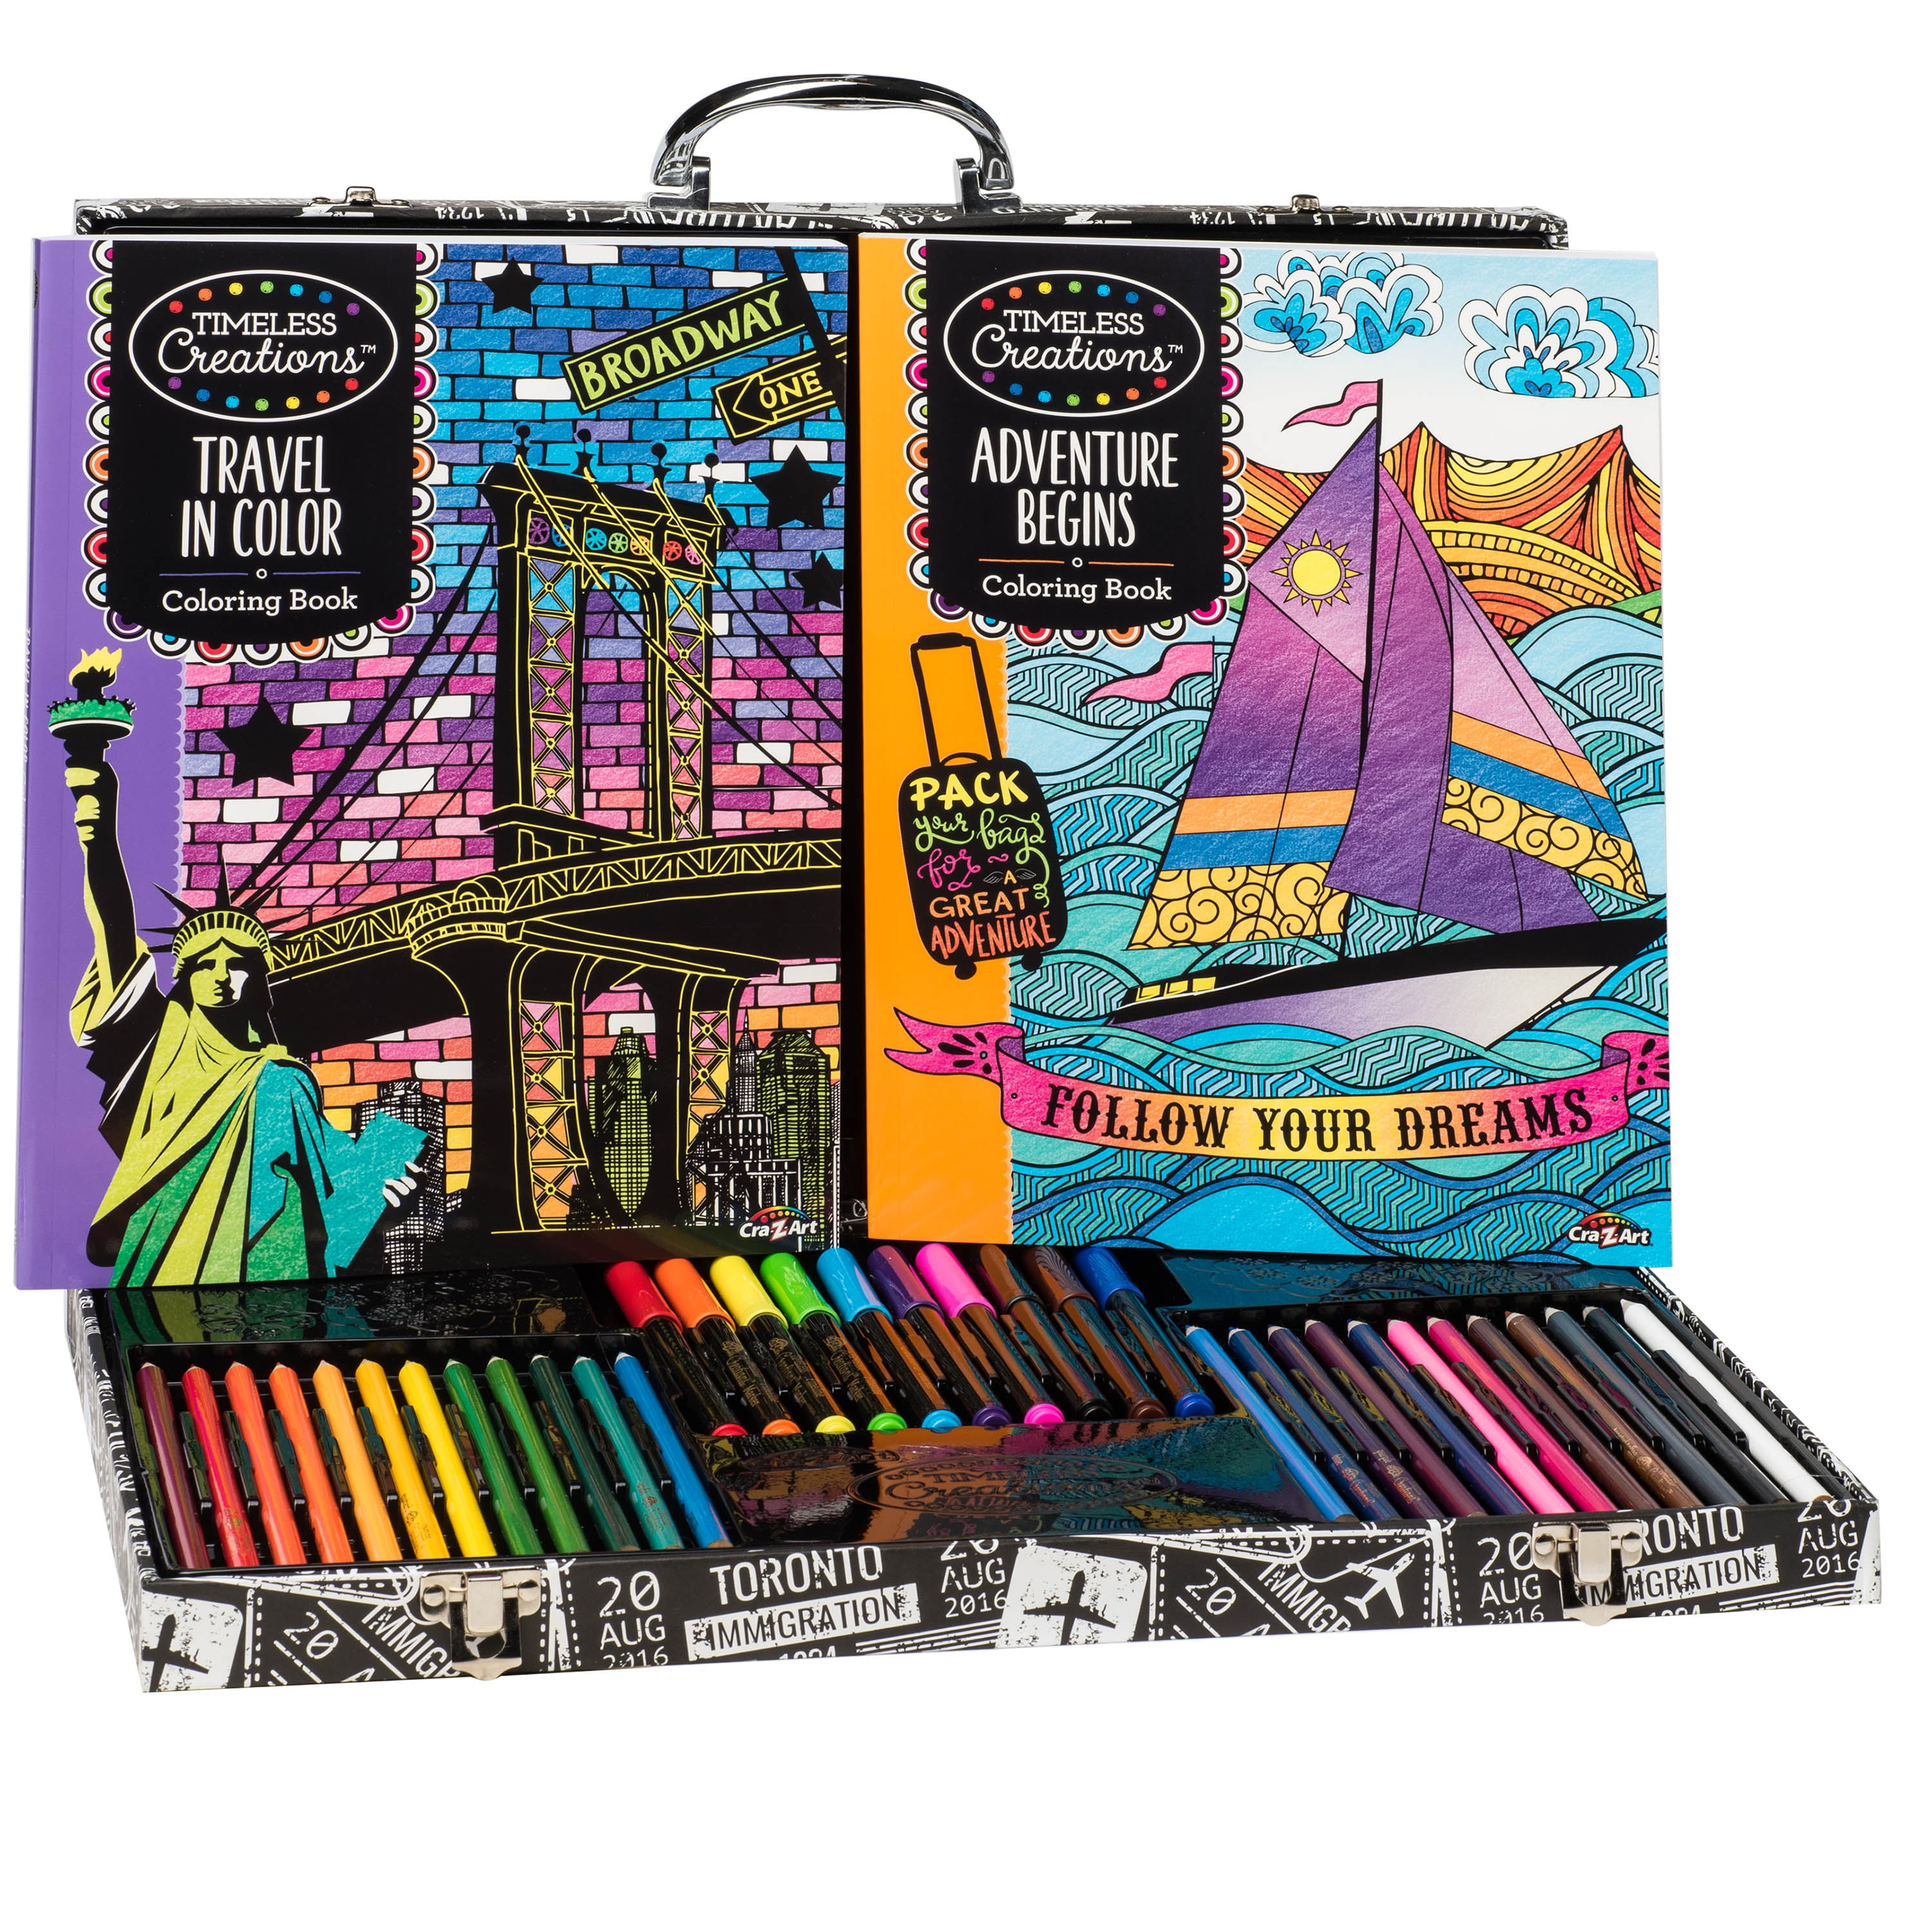 Cra-z-art Timeless Creations Geo Adventure Coloring Book 